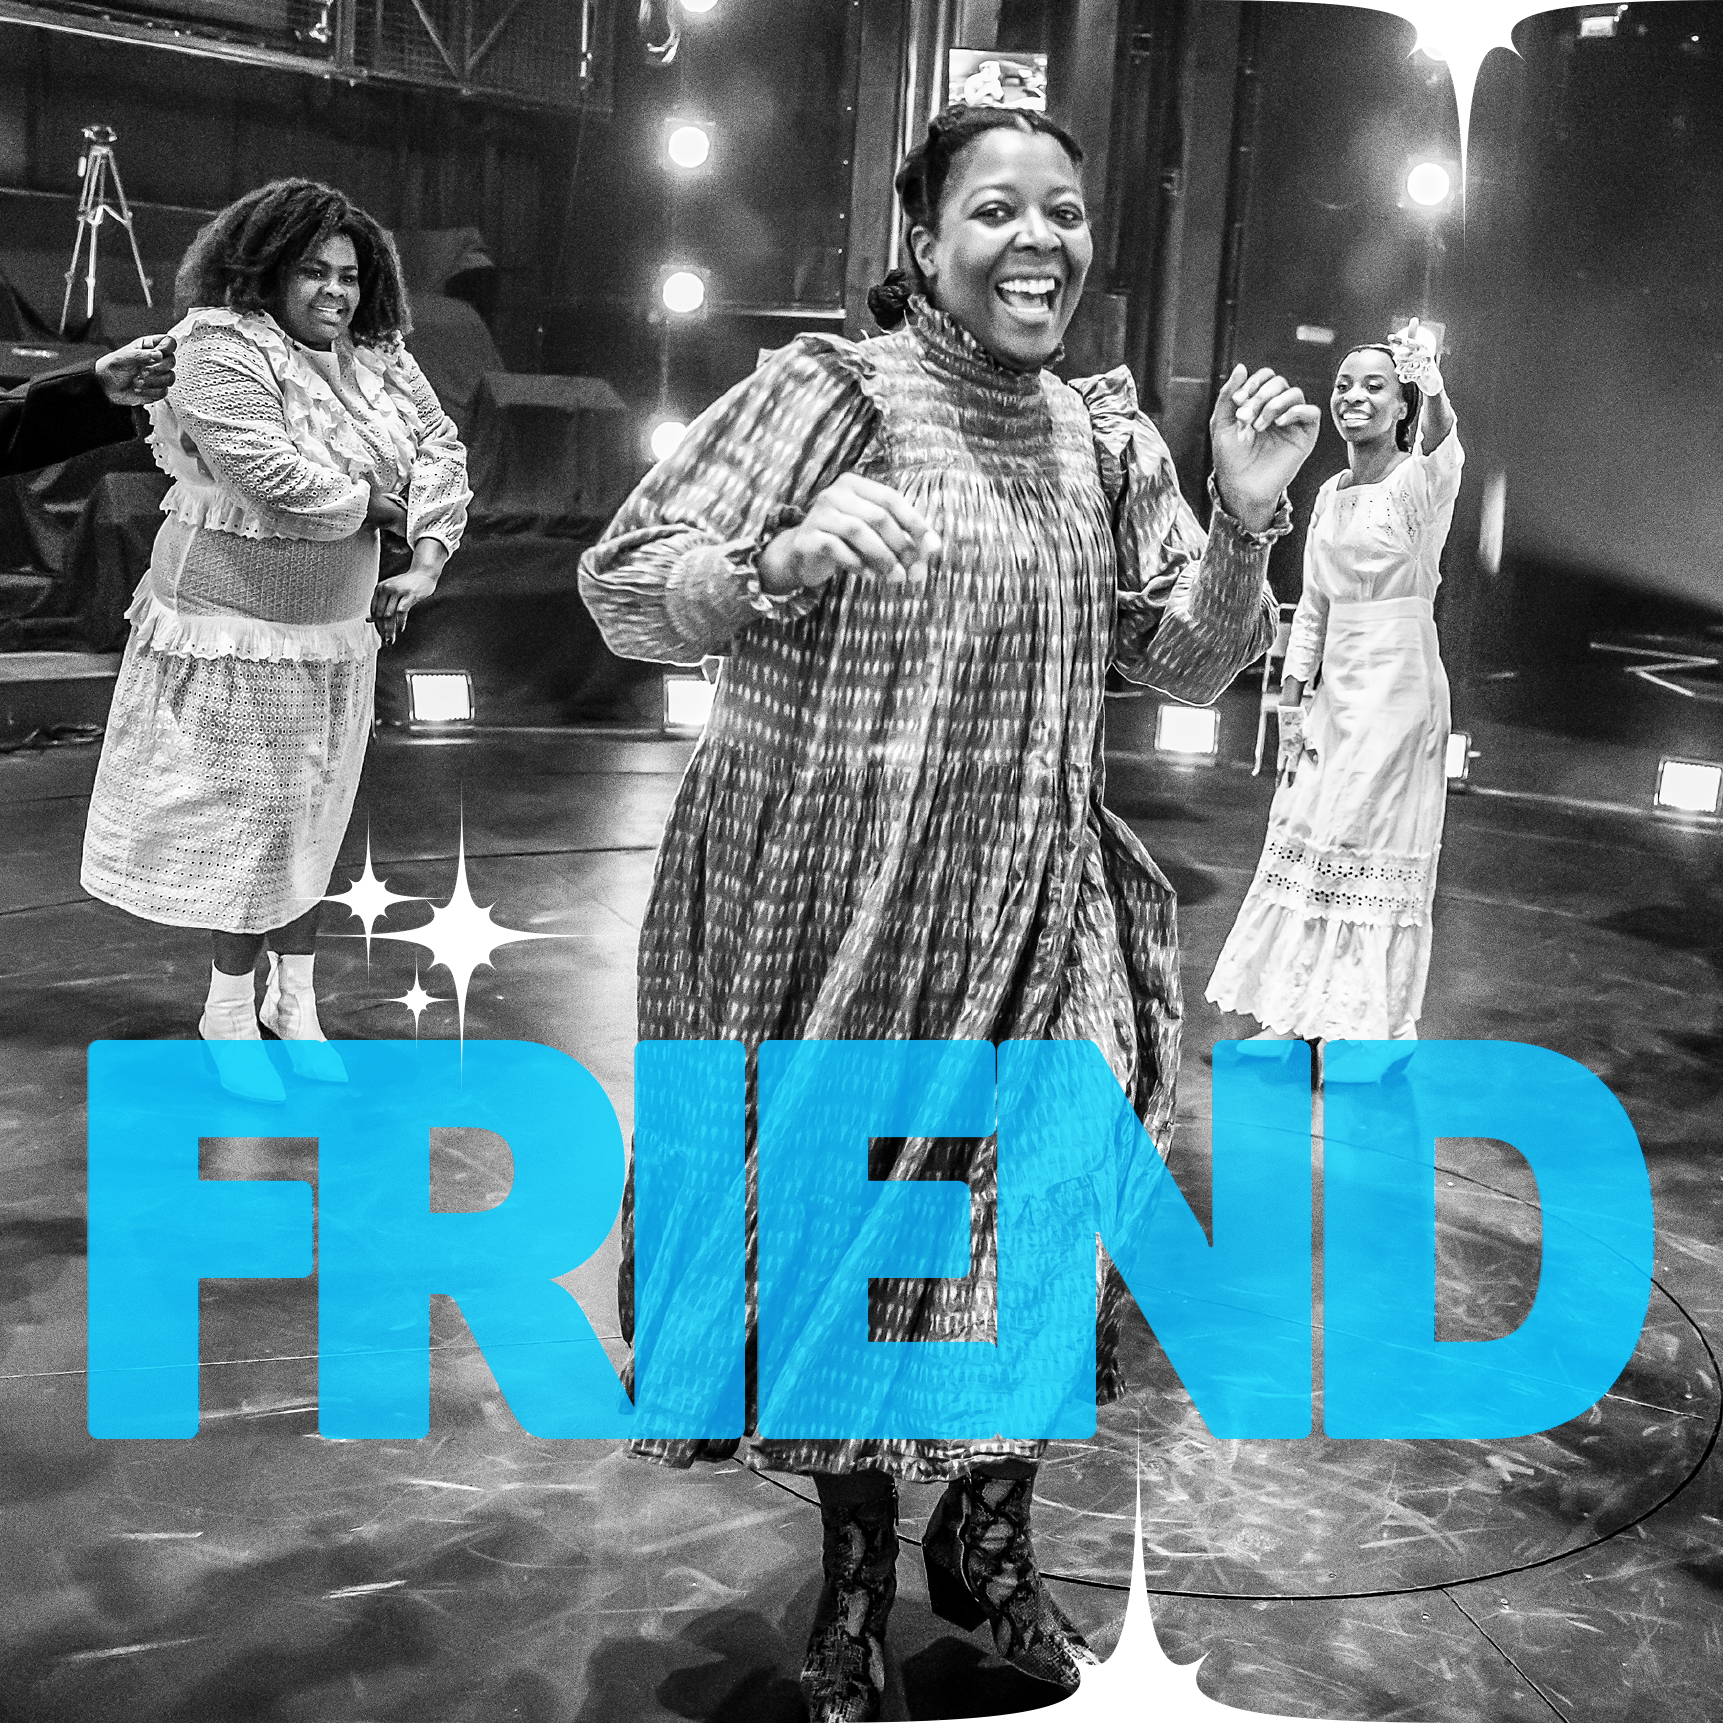 Black and white rehearsal image from The Color Purple at Home showing three female cast members including T'Shan Williams as Celie. Blue text over the image reads 'Friend'.